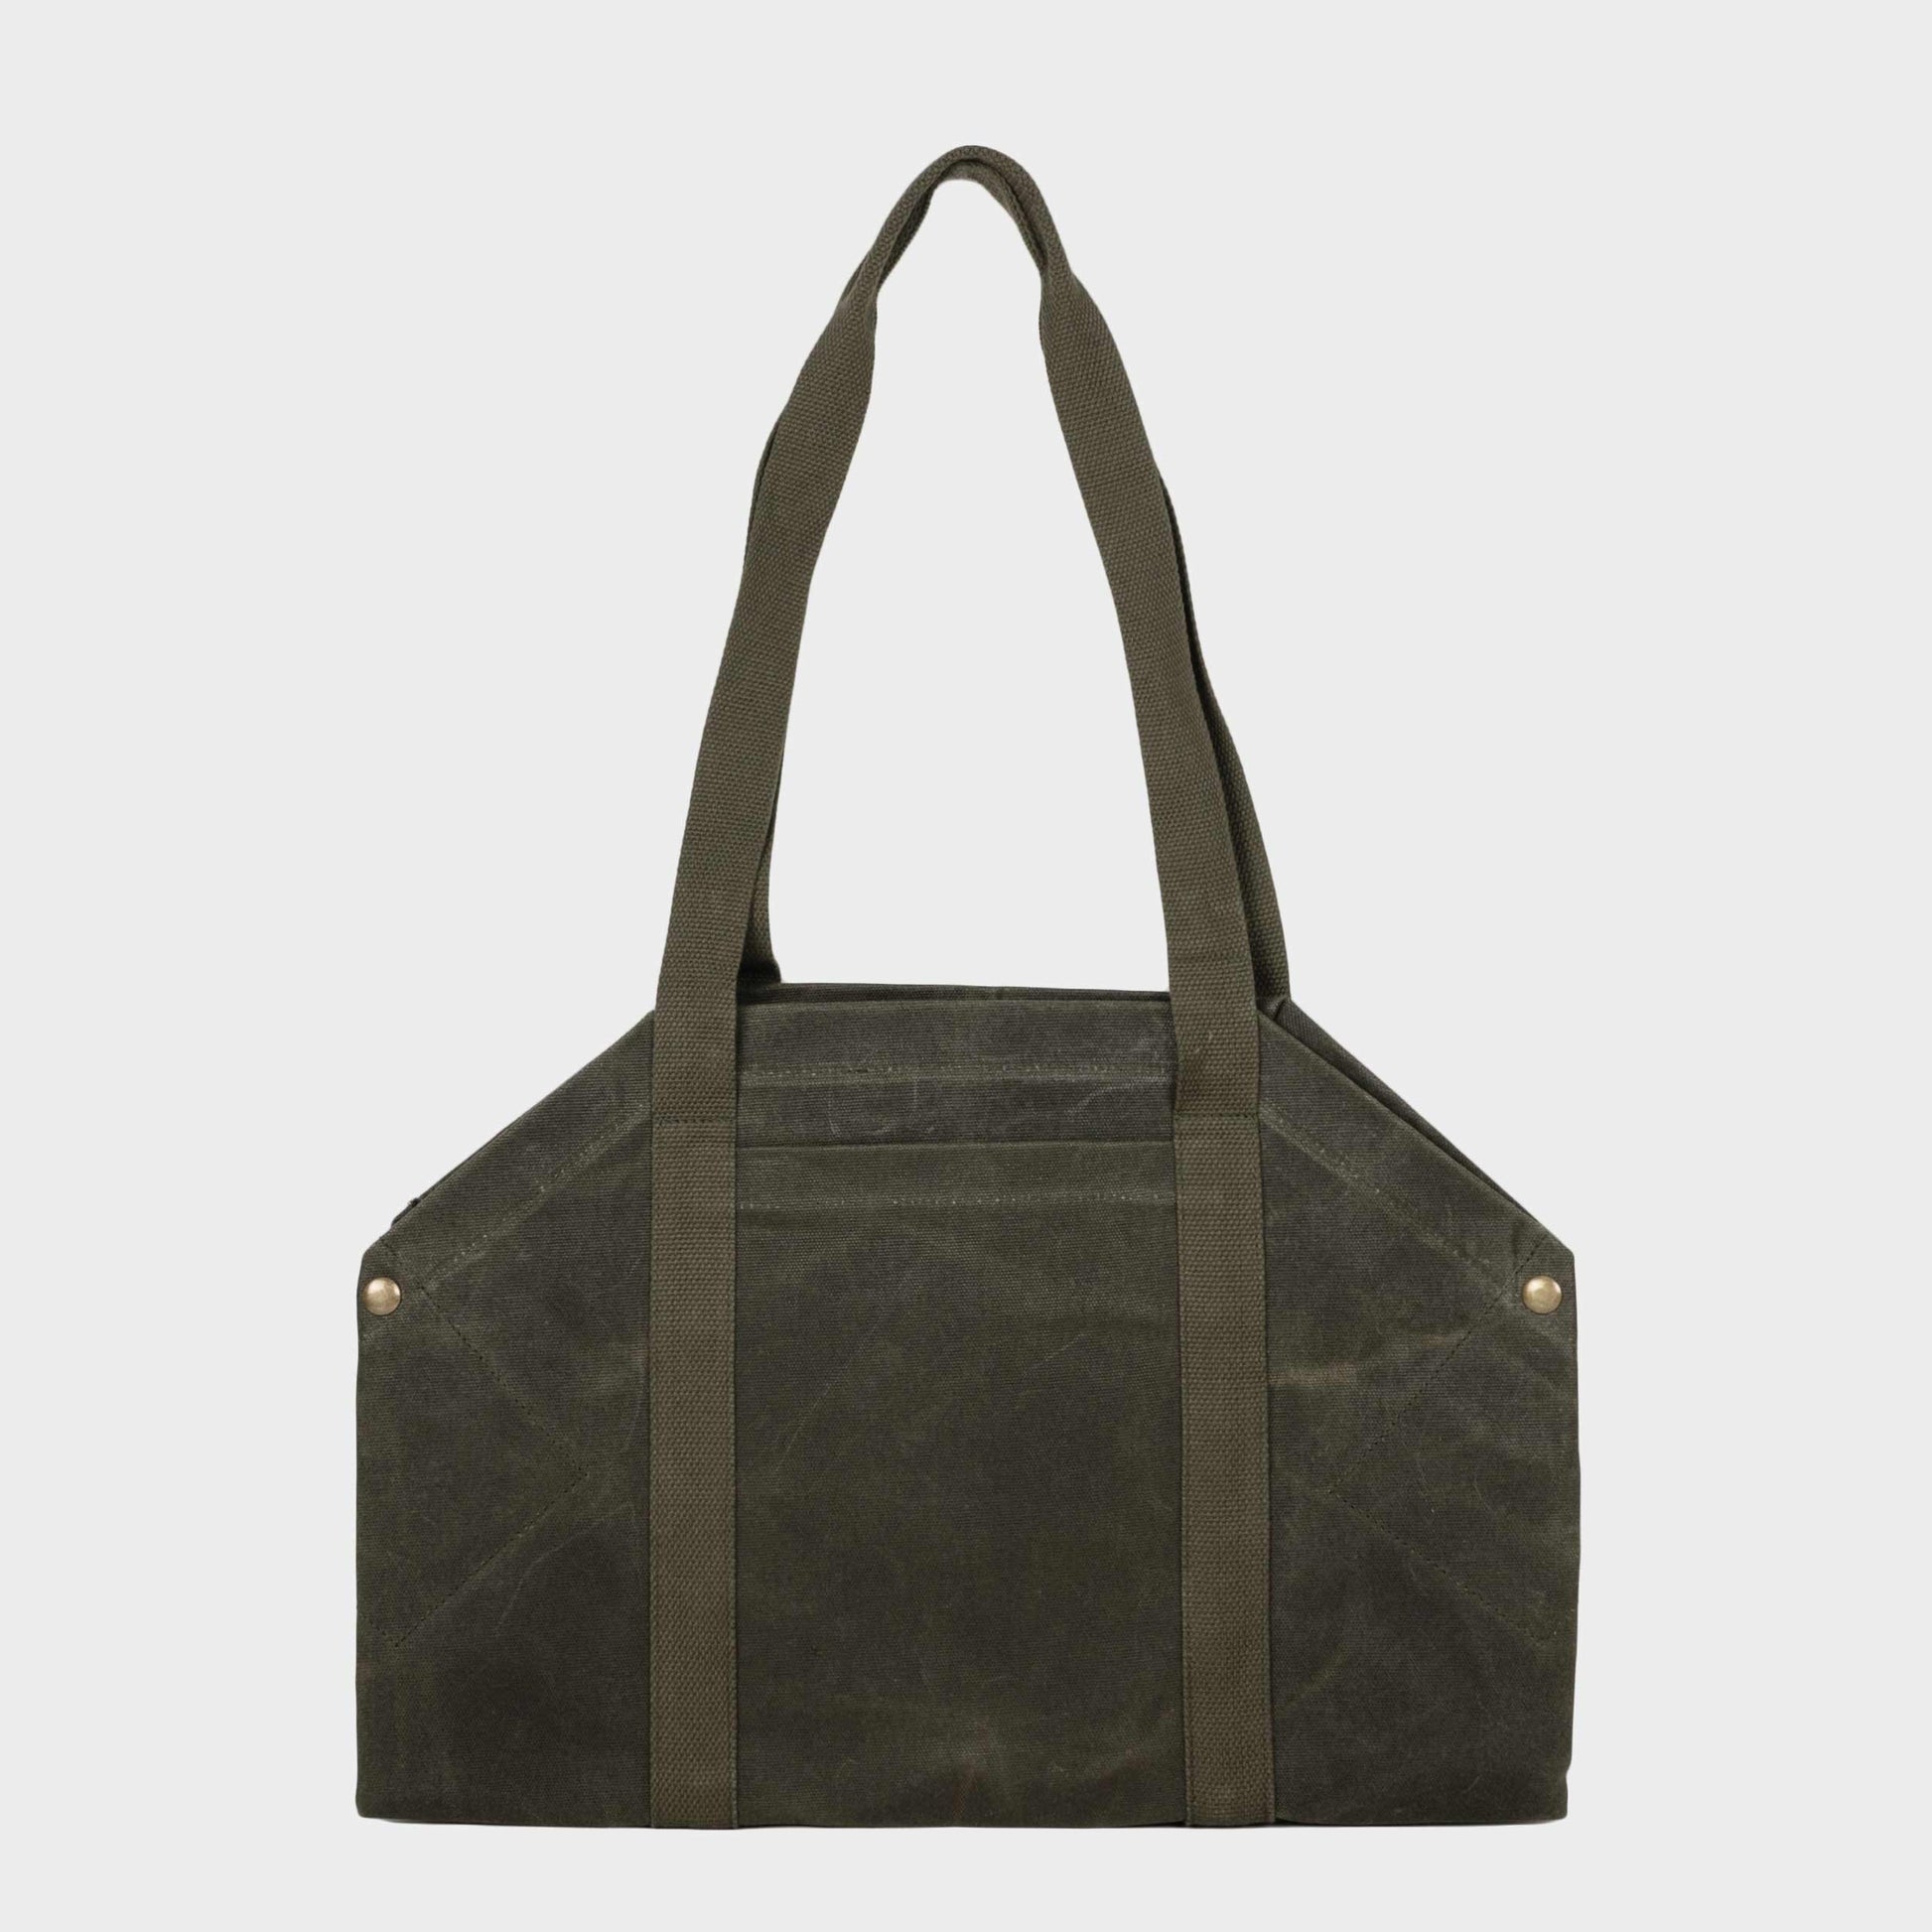 Gardenheir Waxed Canvas Origami Harvesting Trug/Tote in Olive